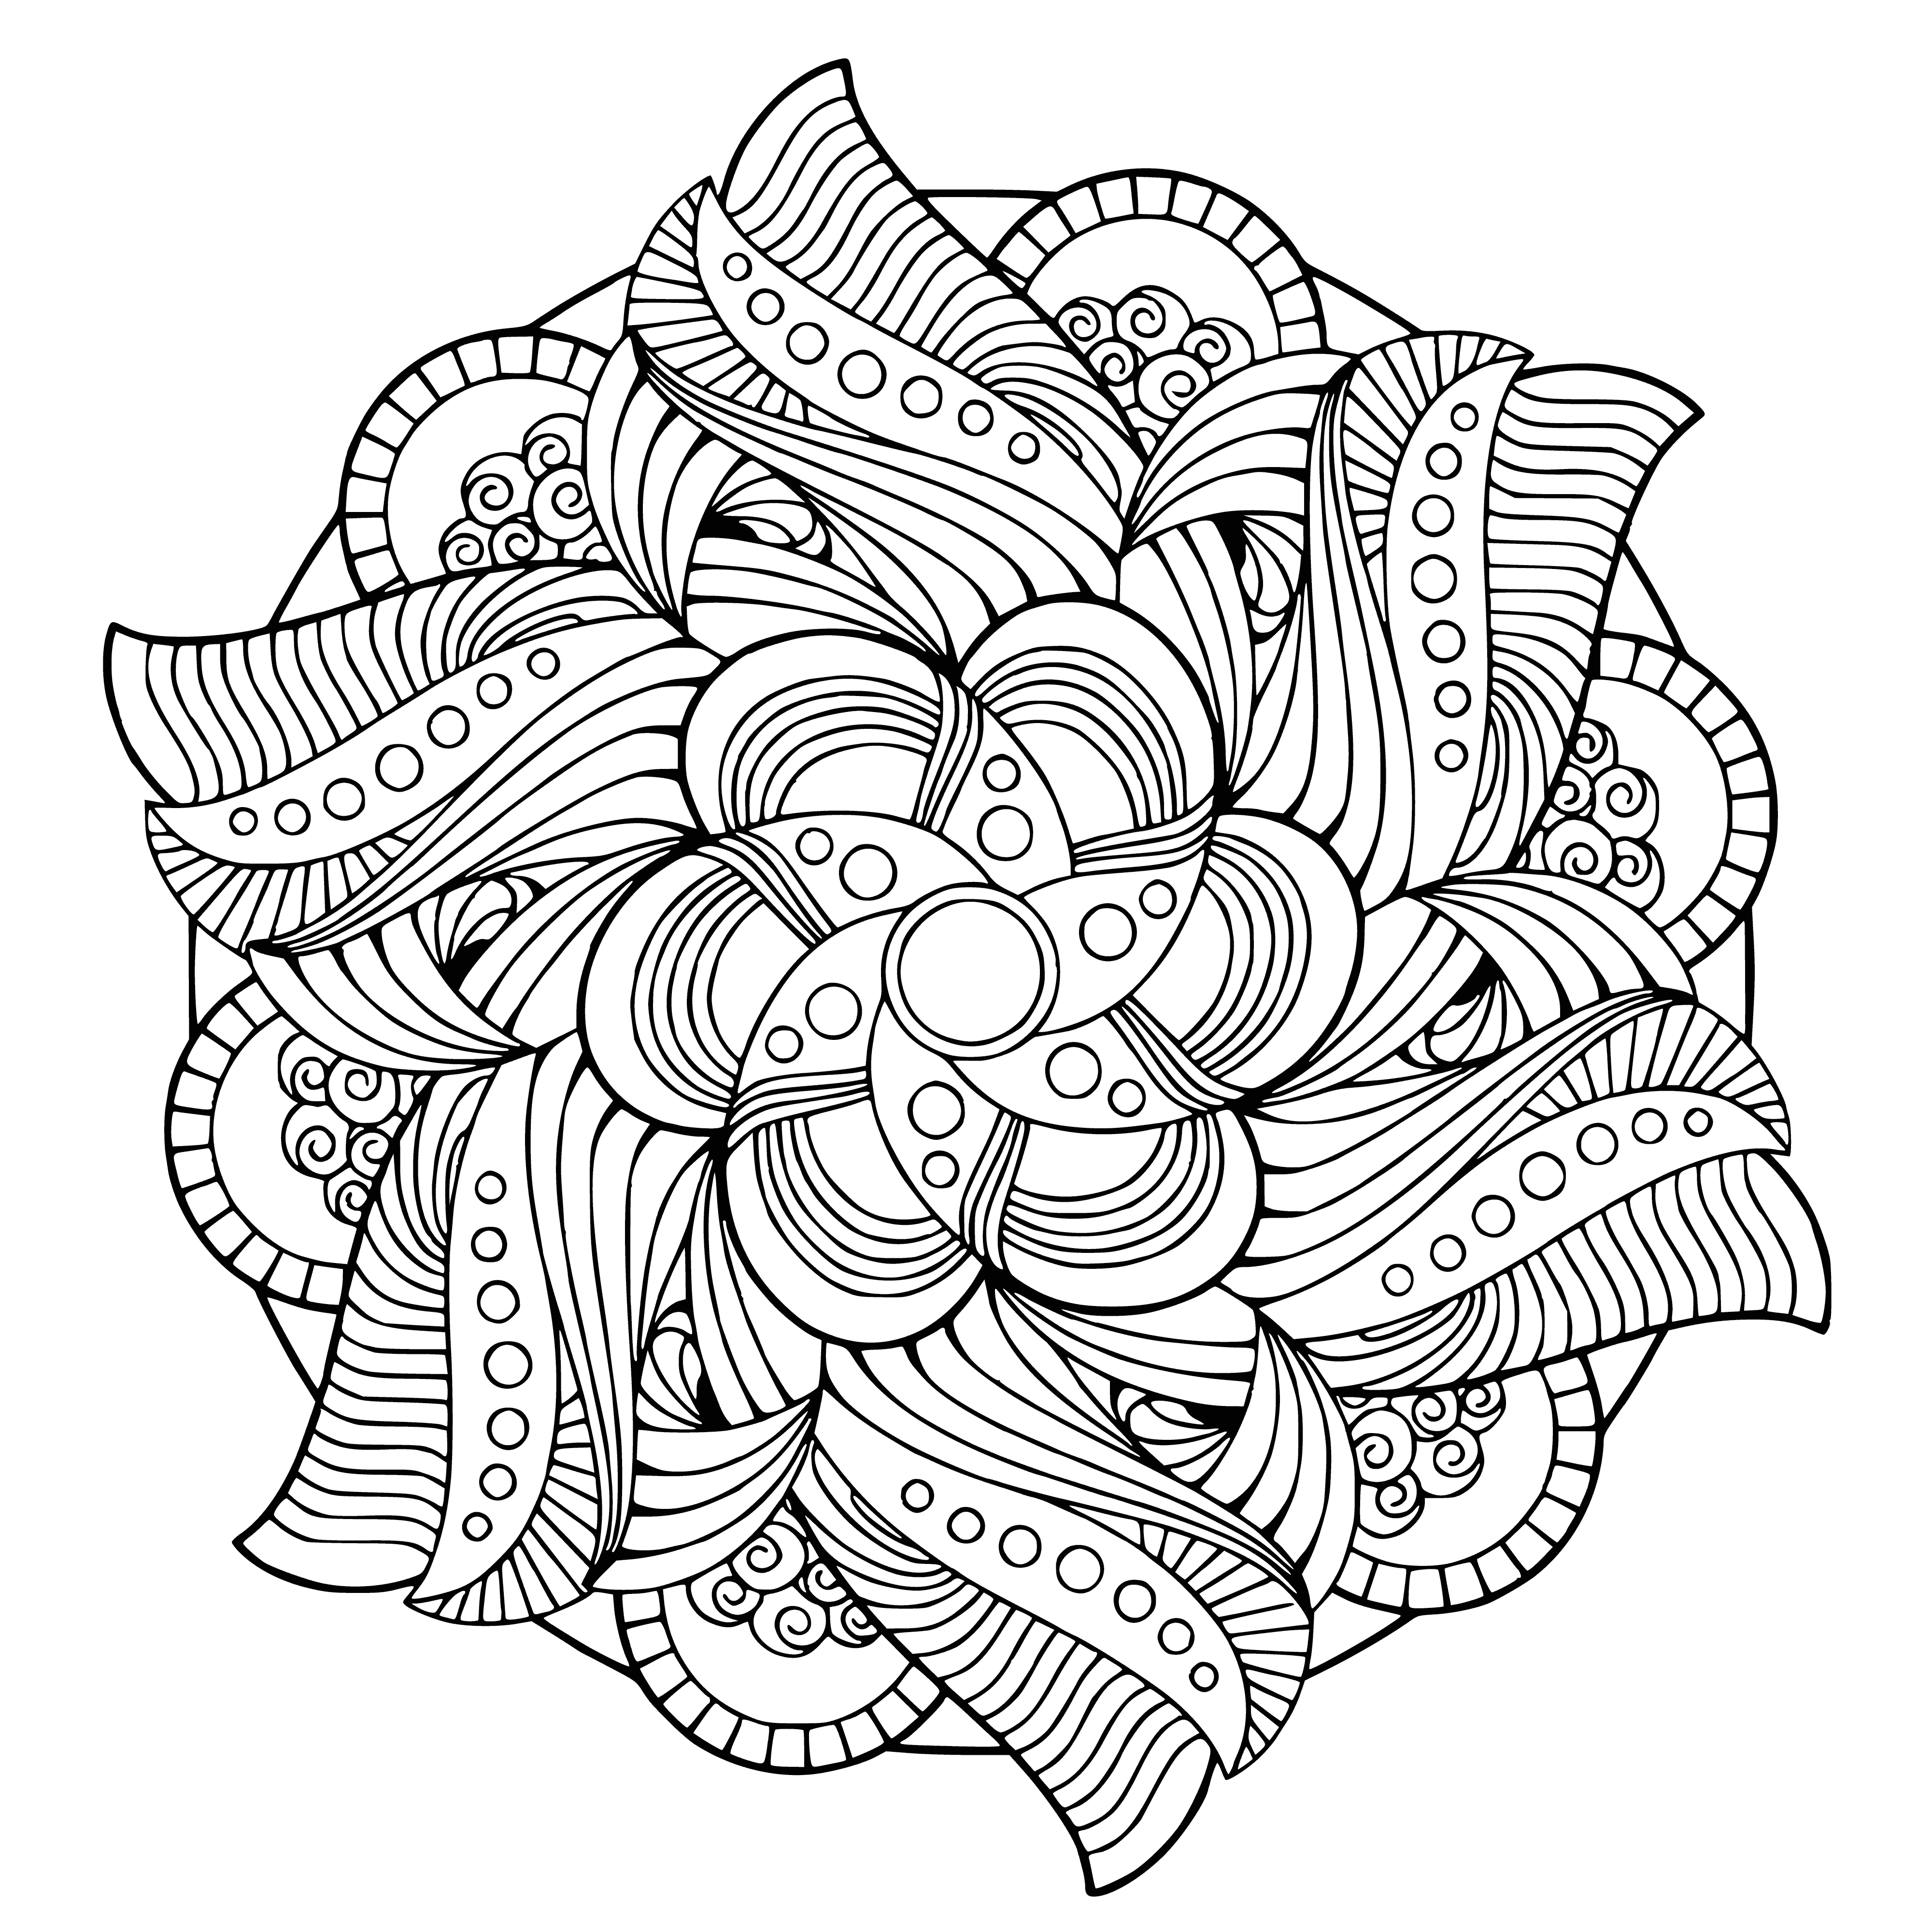 coloring page: Beautiful flower mandala w/8 large flowers and many small ones, w/vibrant colors, & empty center- perfect for relaxing adult coloring.